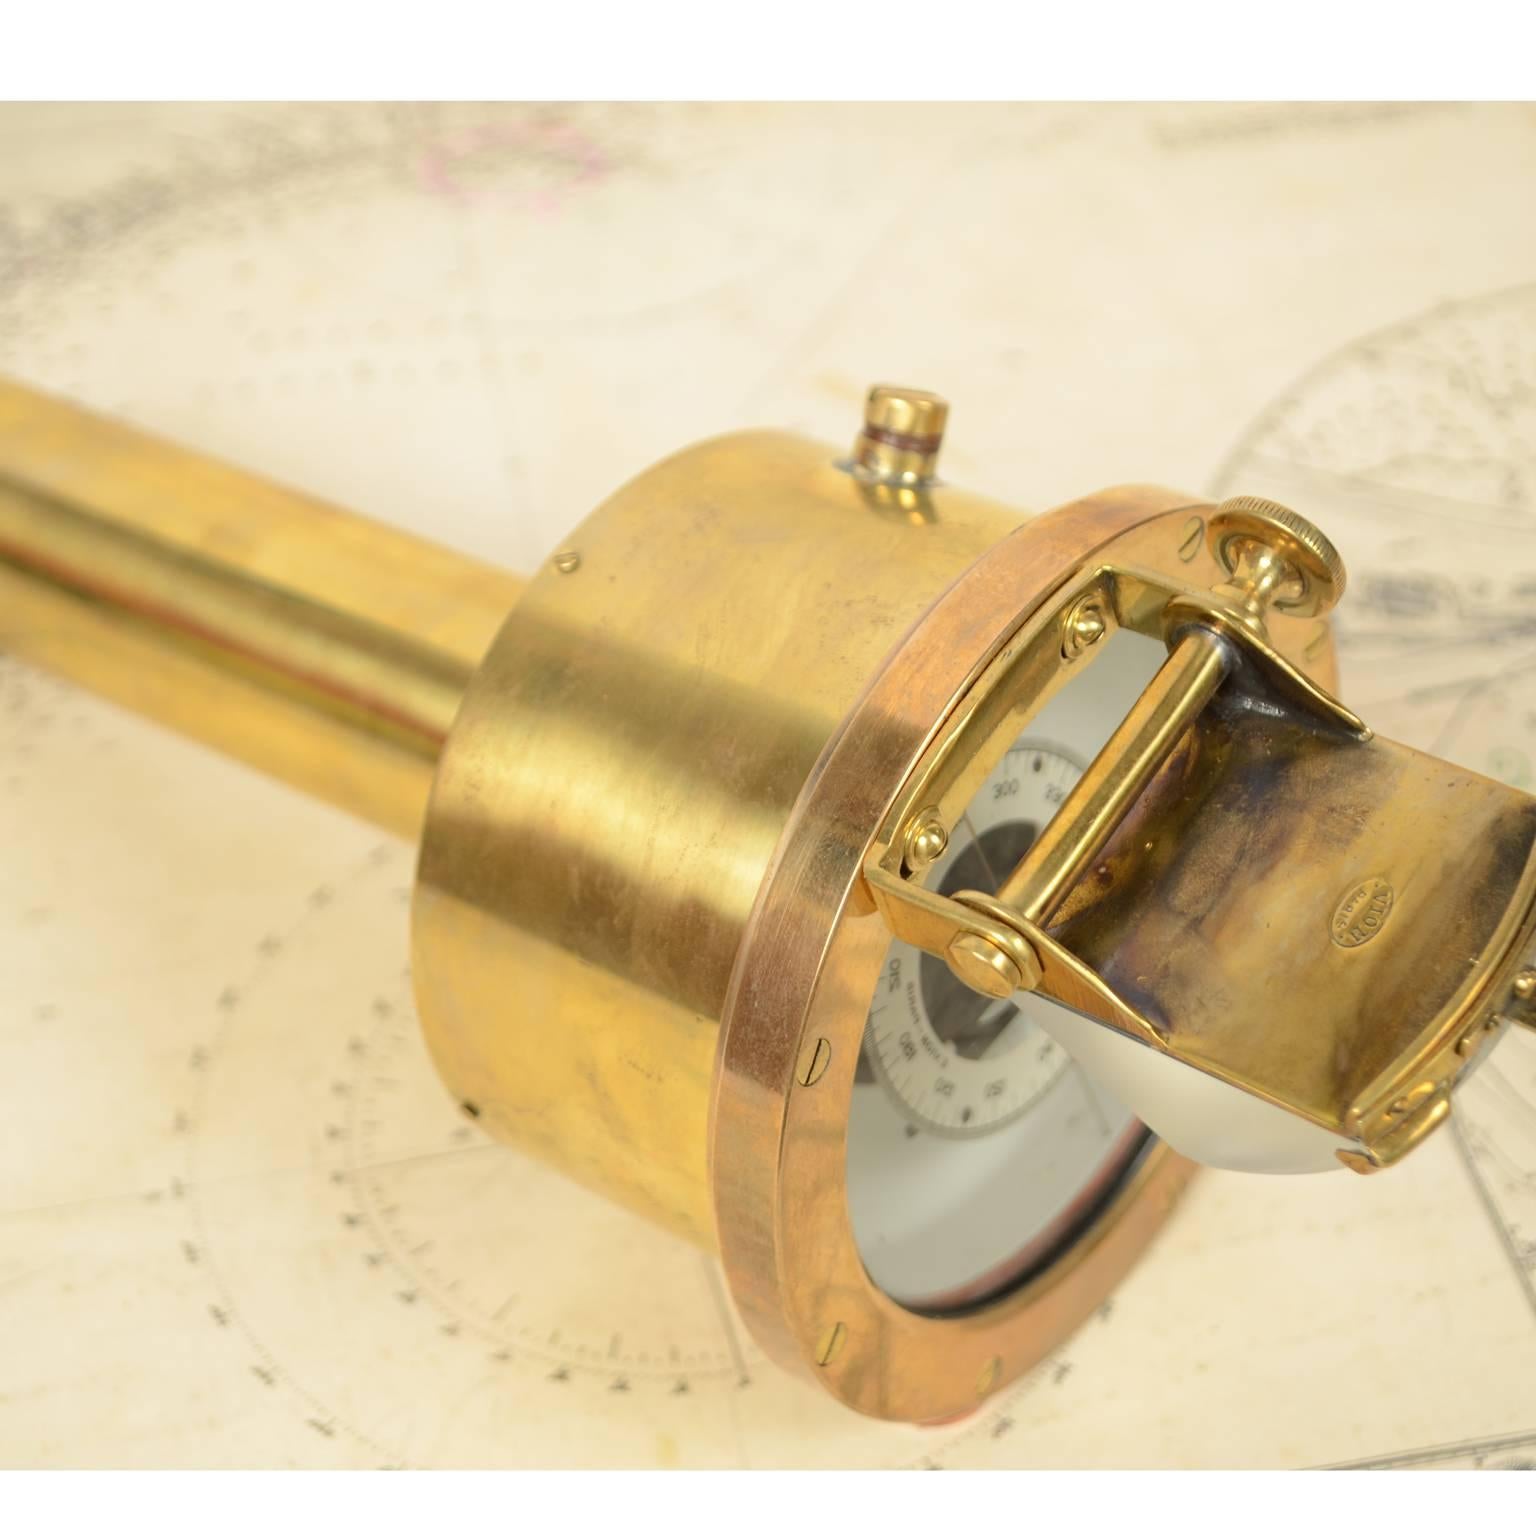 Nautical Brass Magnetic Compass with Original Box by E. Vion Paris, Early 1900 For Sale 2